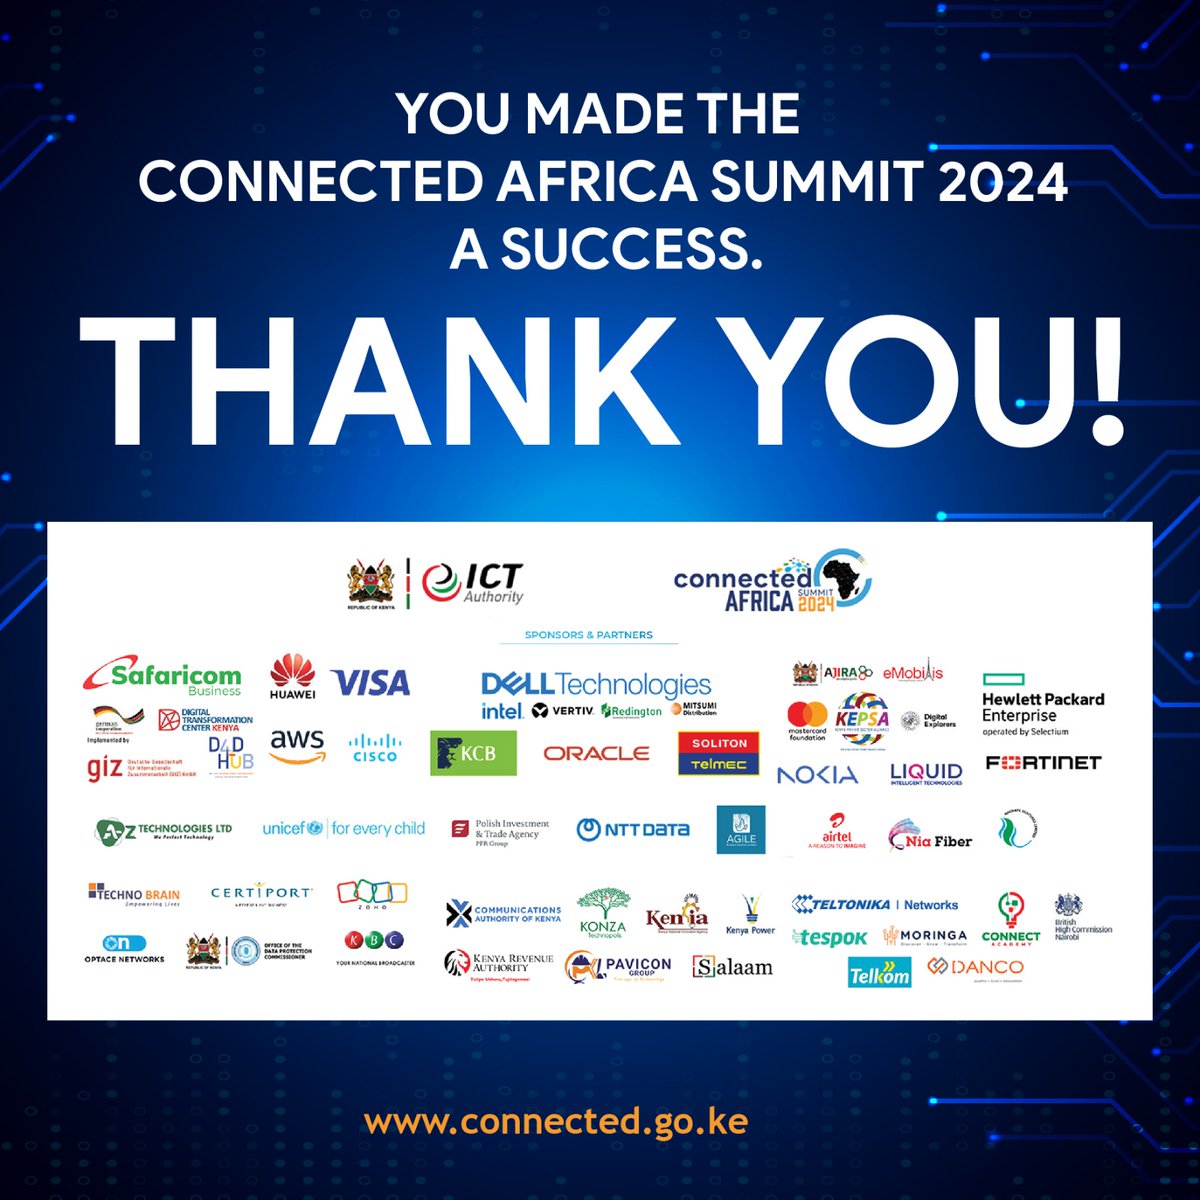 We would like to say a big thank you to all our partners and sponsors. Your unwavering support made the inaugural #ConnectedAfricaSummit2024, a BIG success. We couldn't have done it without you. Here's to a vibrant connected and digitally empowered Africa.